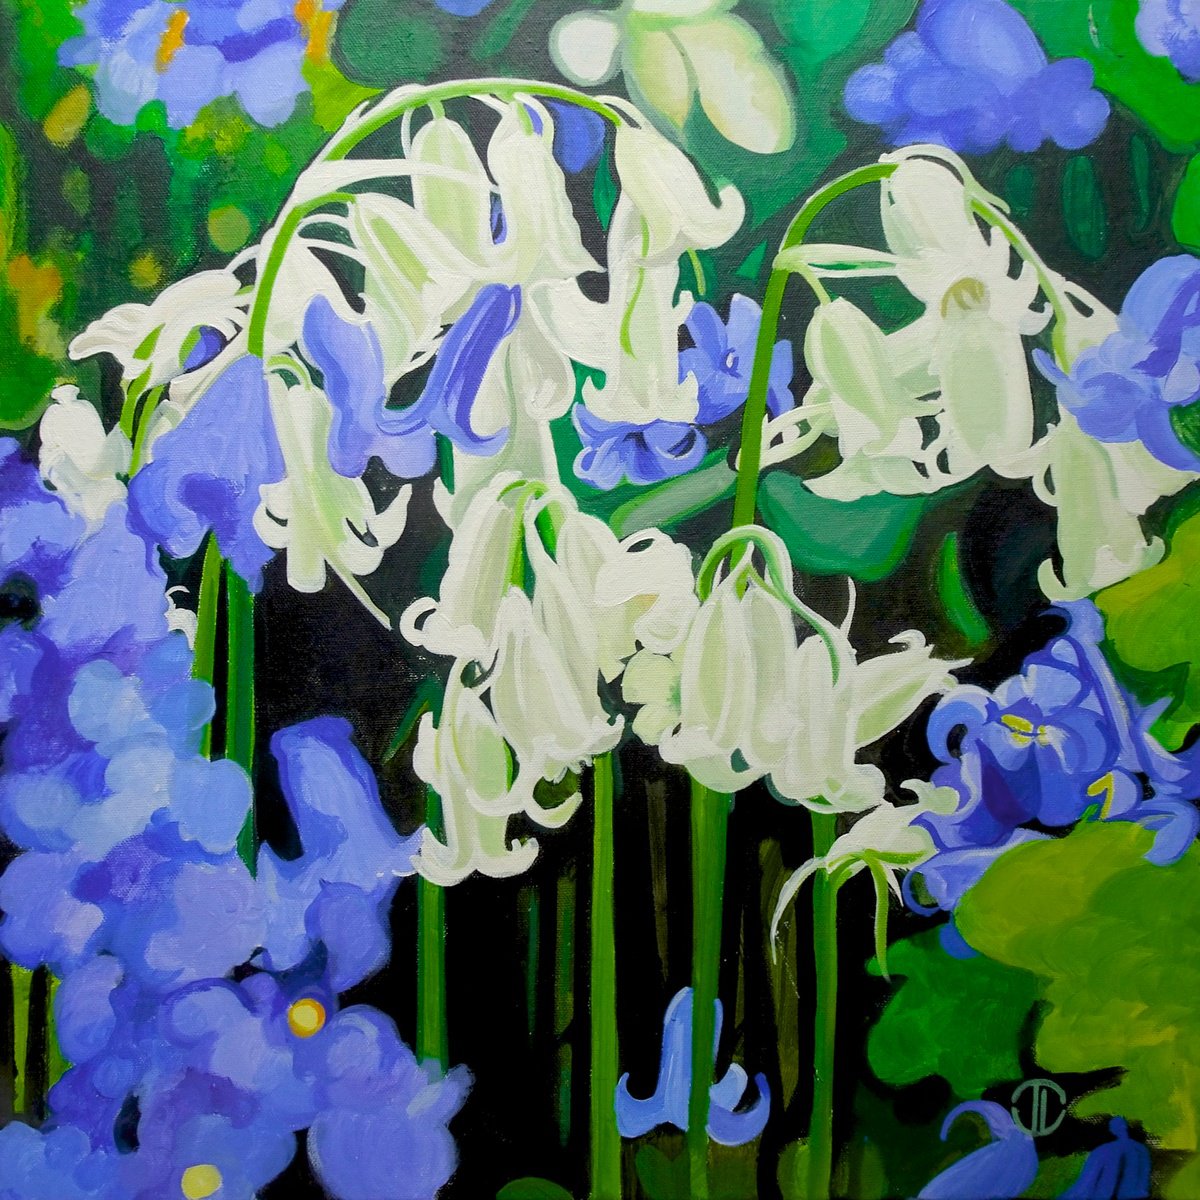 Bluebells And Whitebells In The Sun by Joseph Lynch